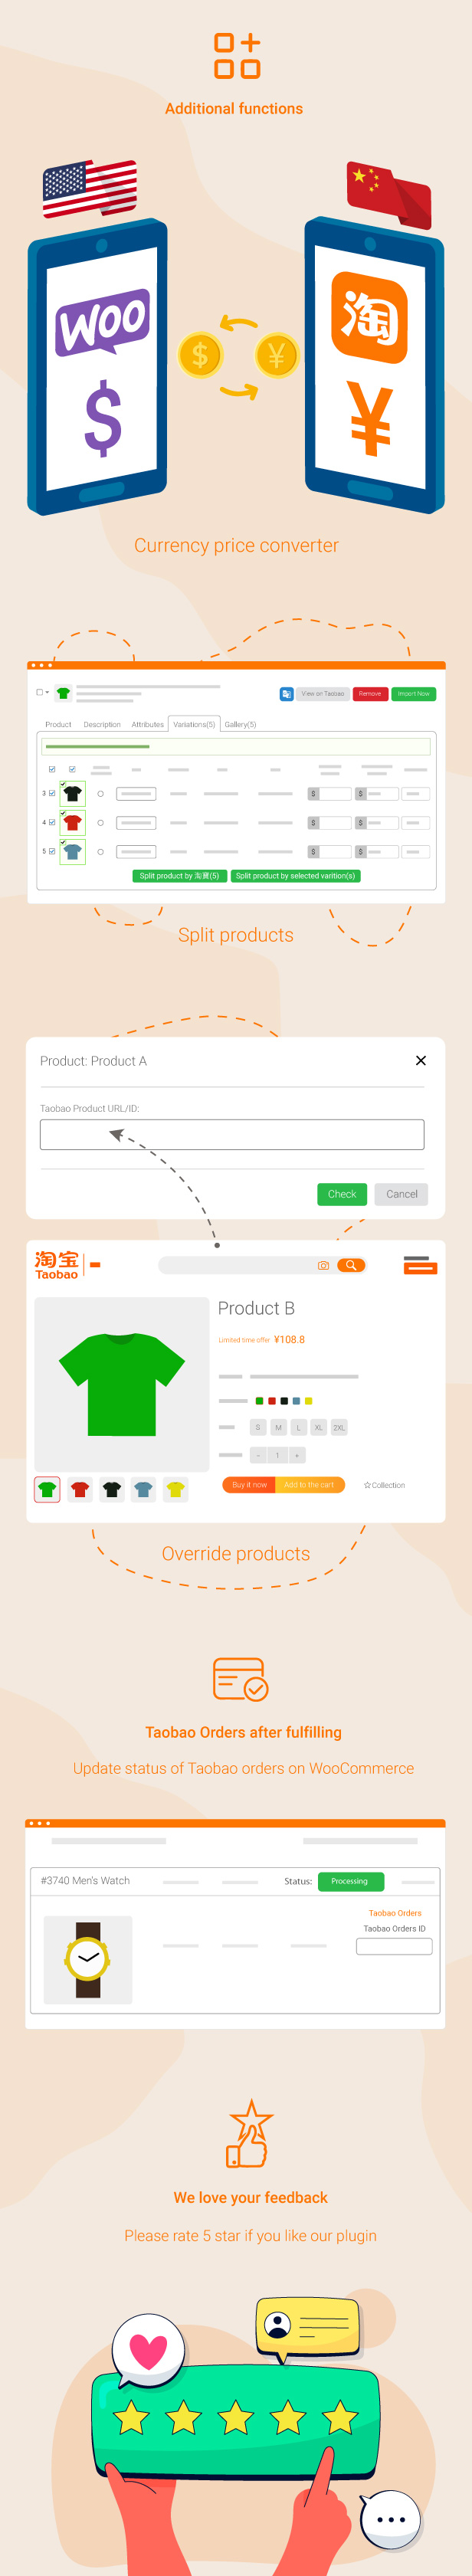 ChinaDS – WooCommerce Tmall-Taobao Dropshipping Inforaphic 3